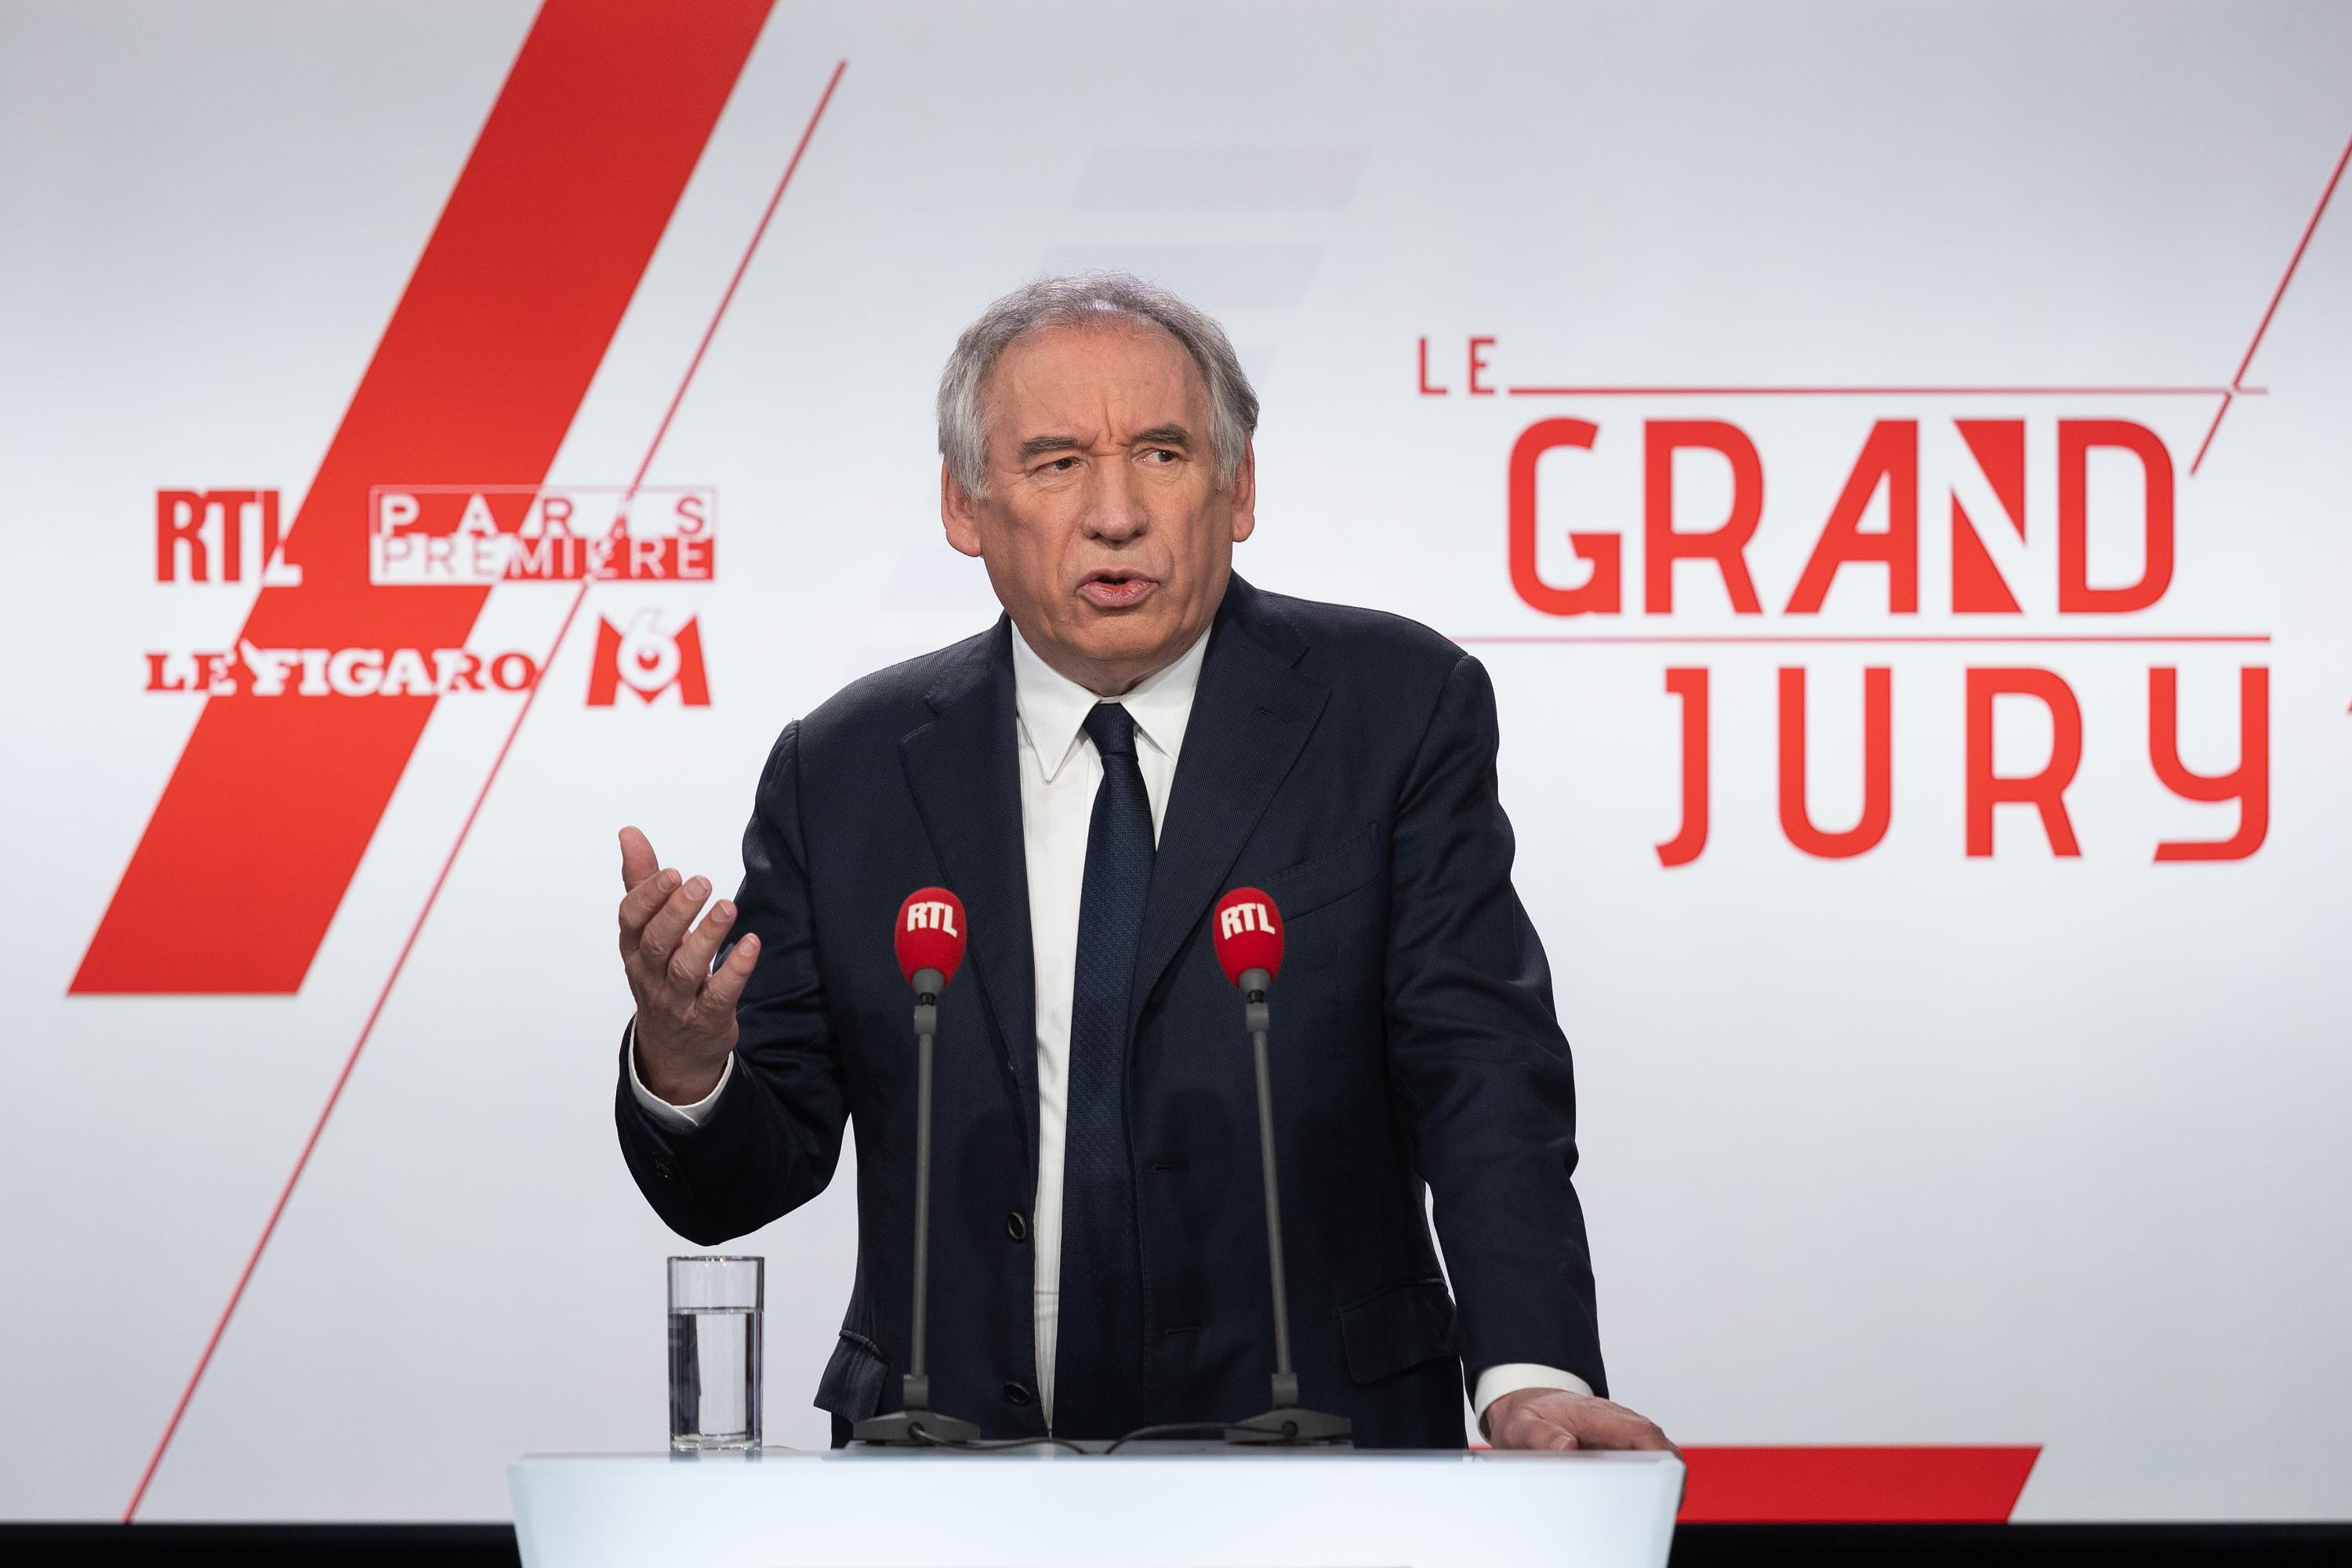 Europeans: “All those who claim that we don’t need Europe are liars”, criticizes Bayrou